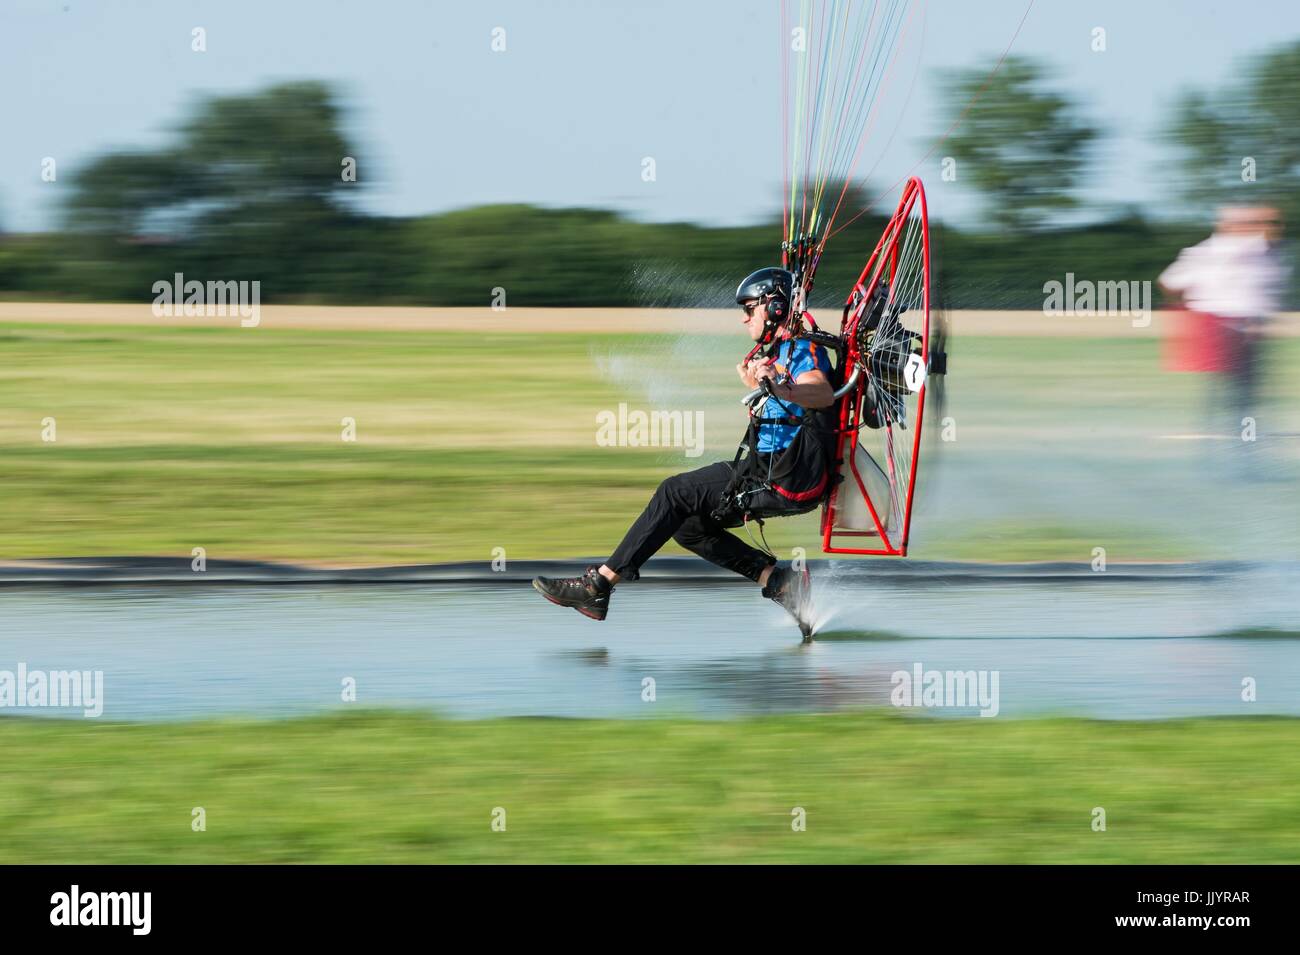 Wroclaw, Poland. 21st July, 2017. The World Games, an international multi-sport event is hold on July 20 in Wroclaw, Poland.  In the picture: Paramotoring Credit: East News sp. z o.o./Alamy Live News Stock Photo